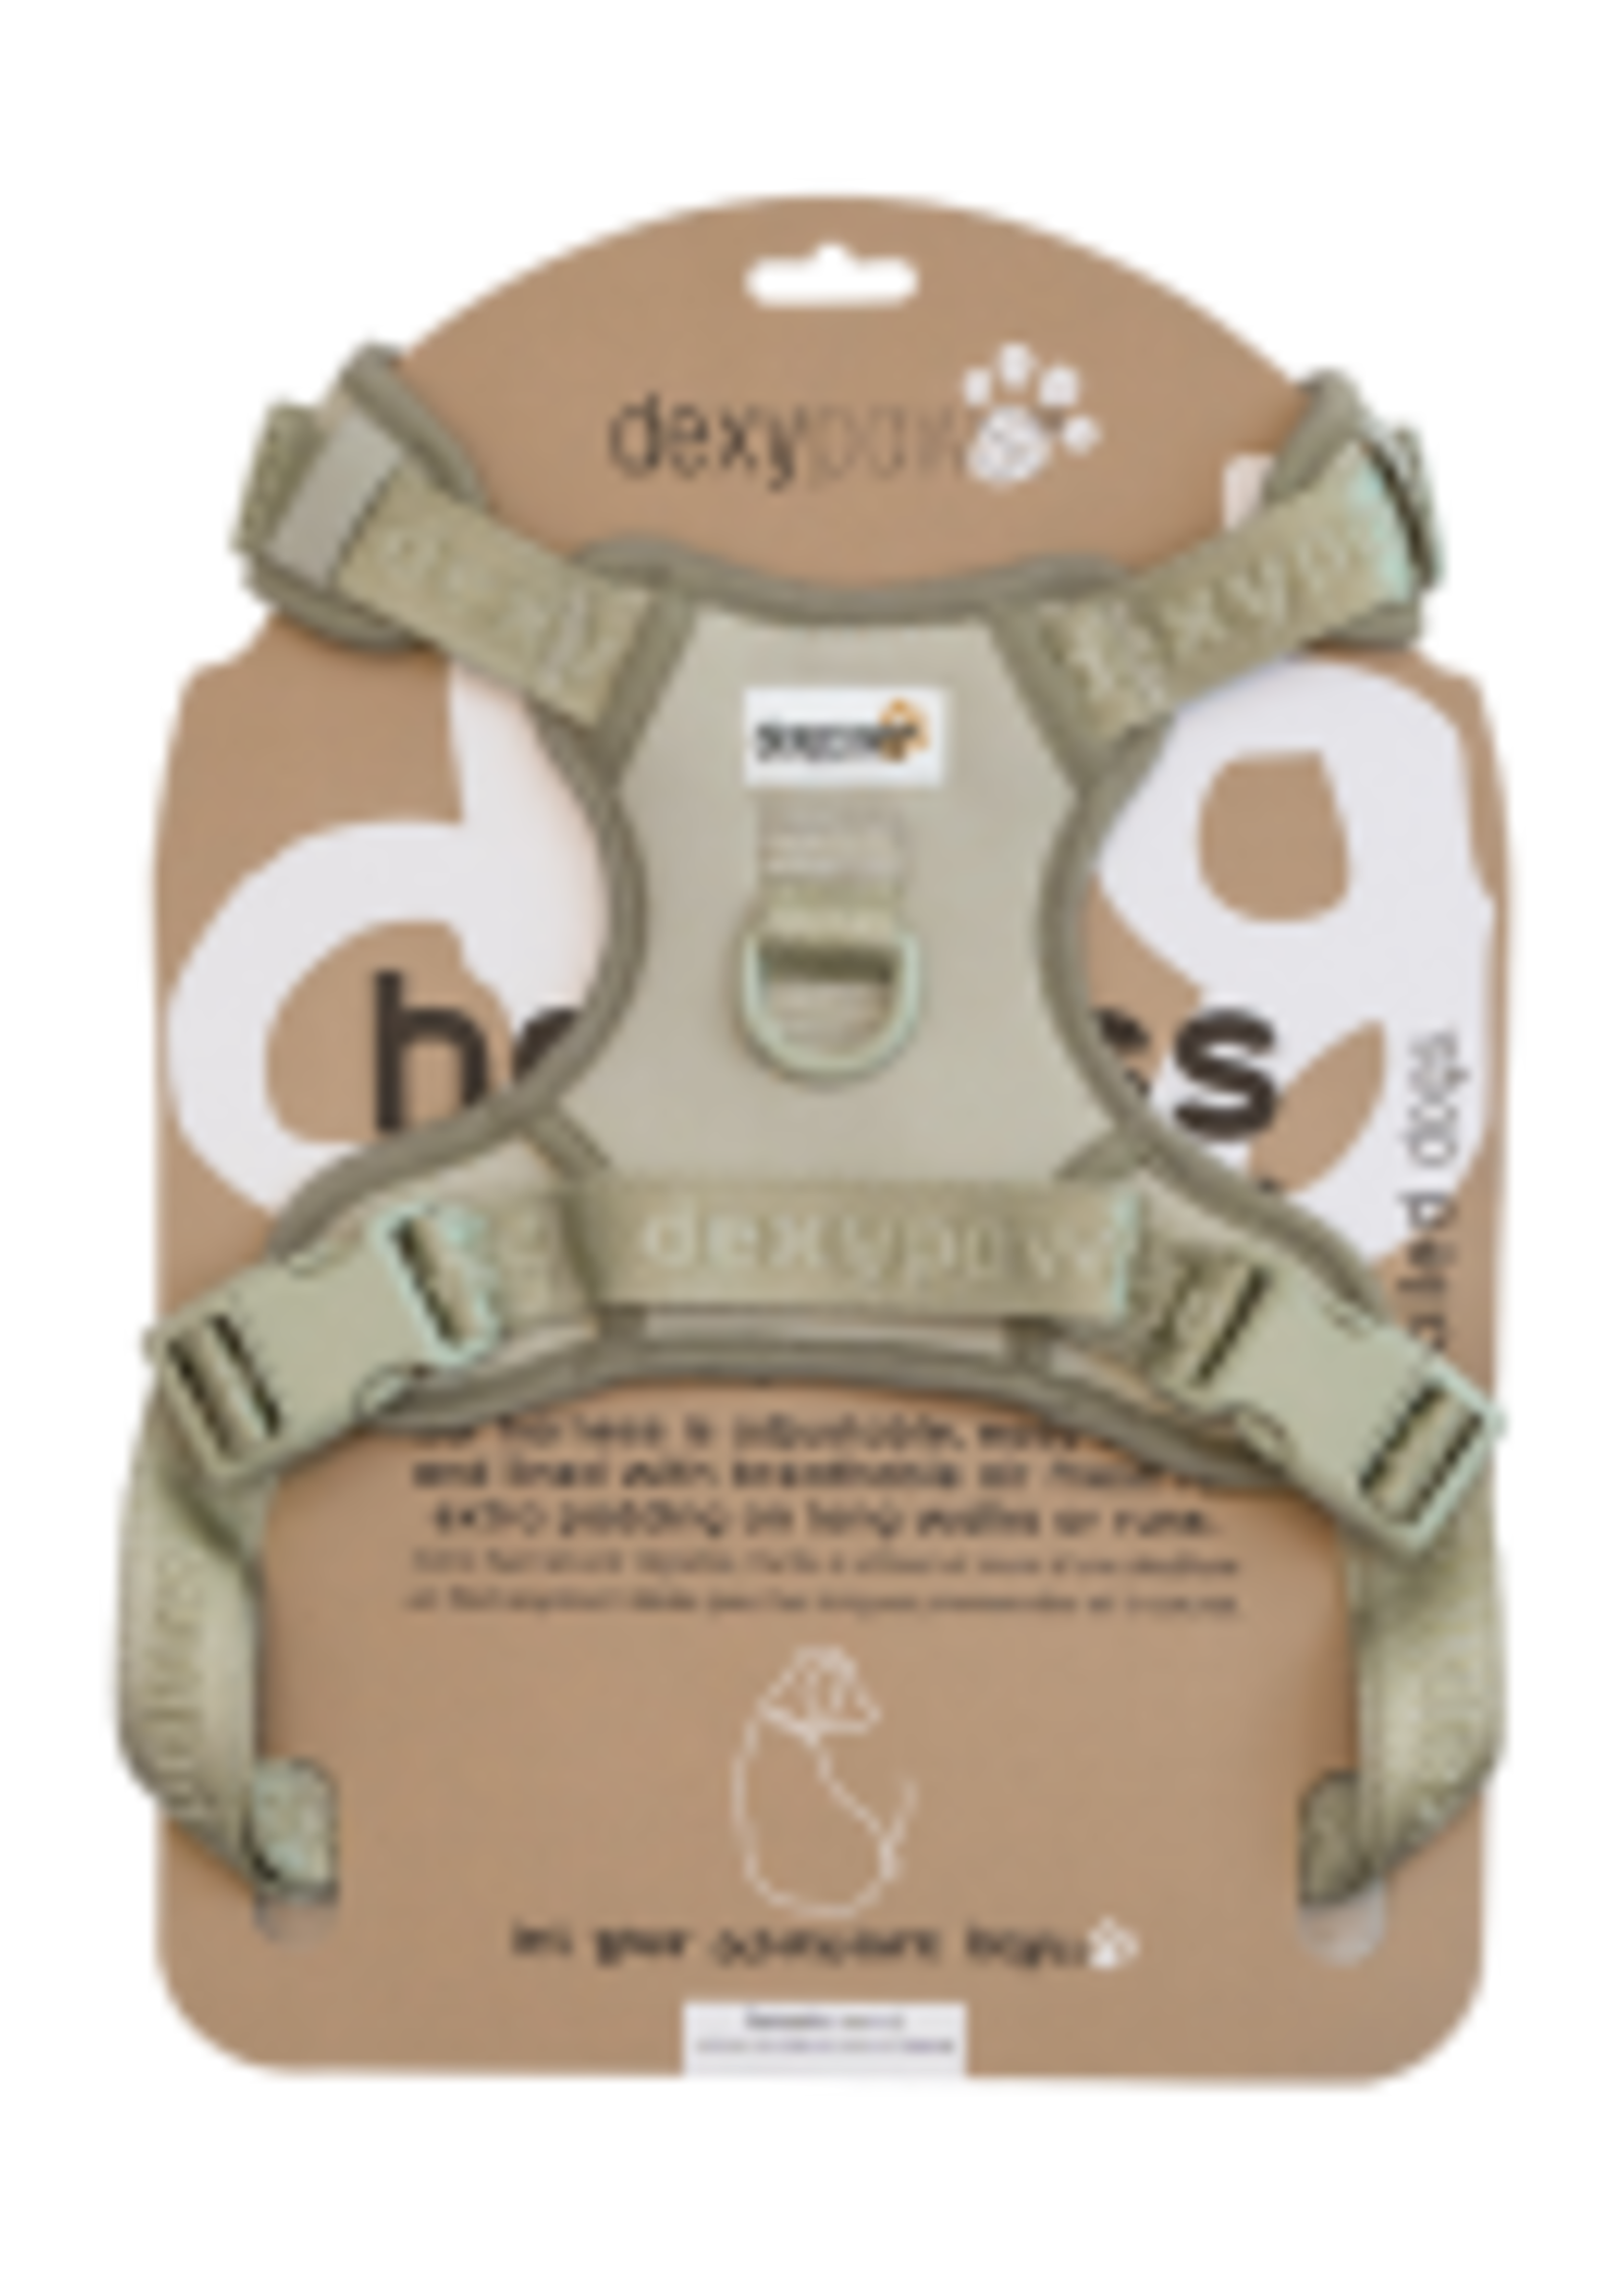 DexyPaws Dexypaws Dog No-Pull Harness Sage Green Large